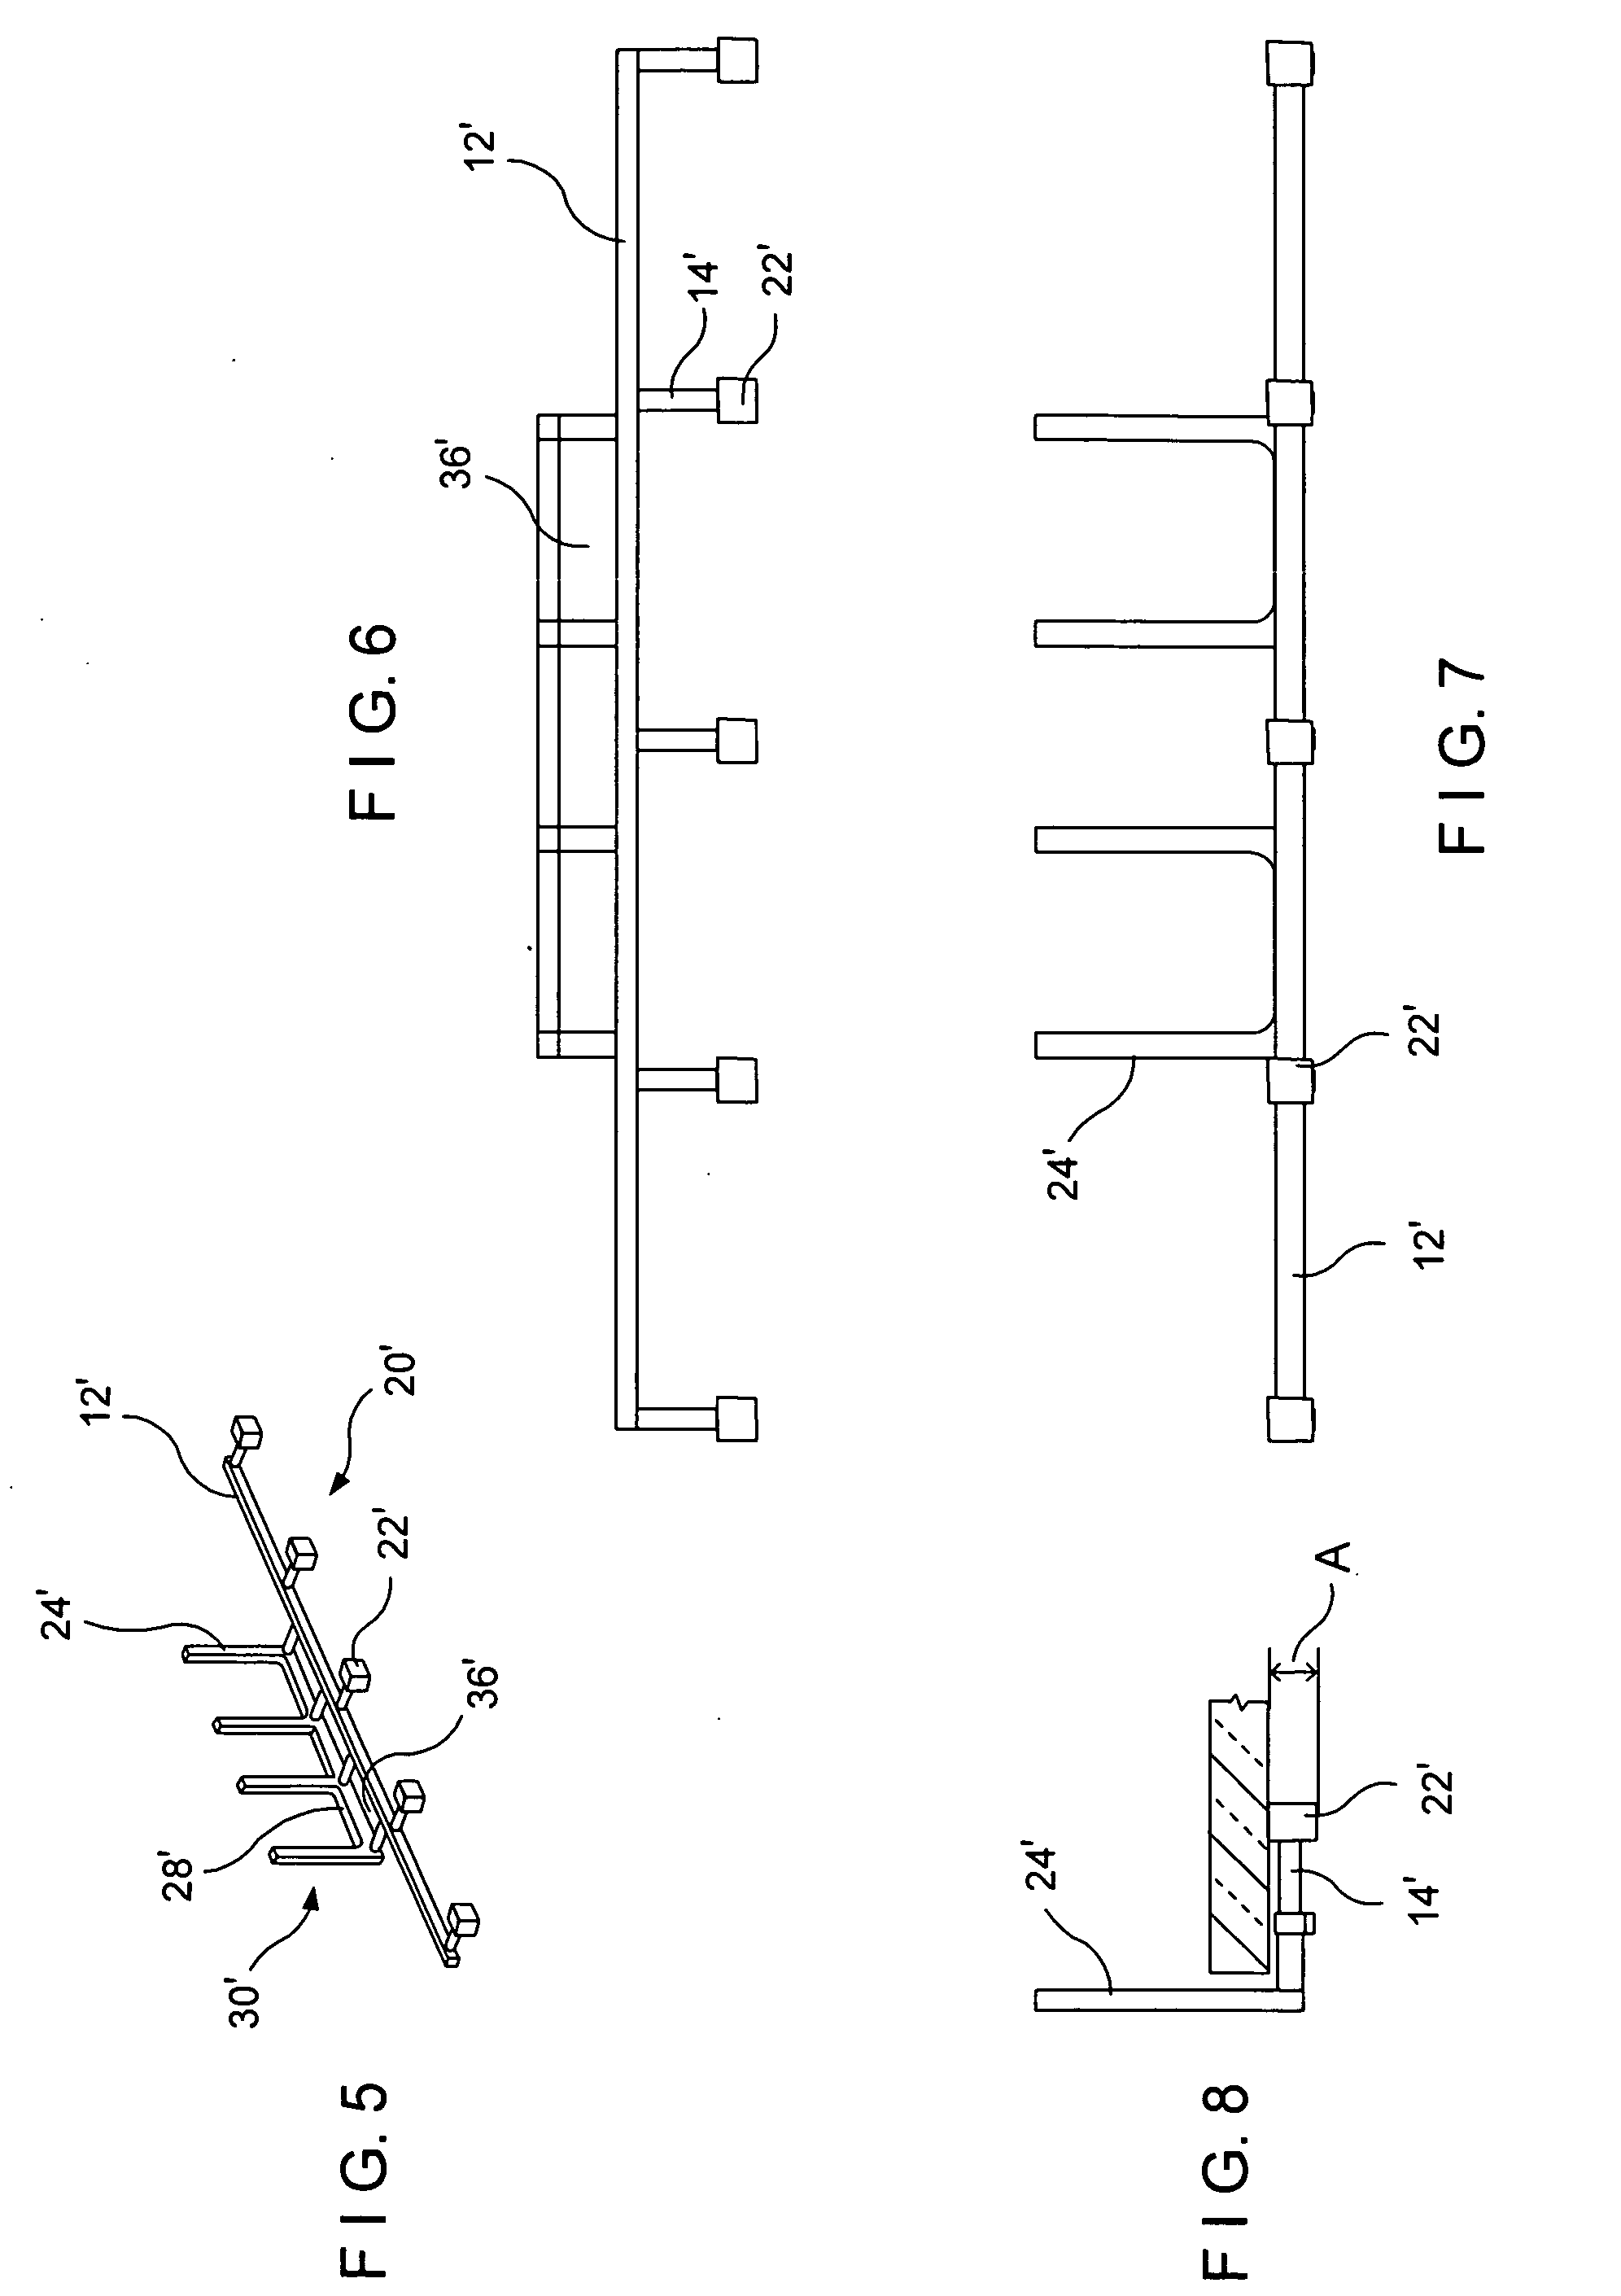 Mounting device for a glazing panel and method of its use